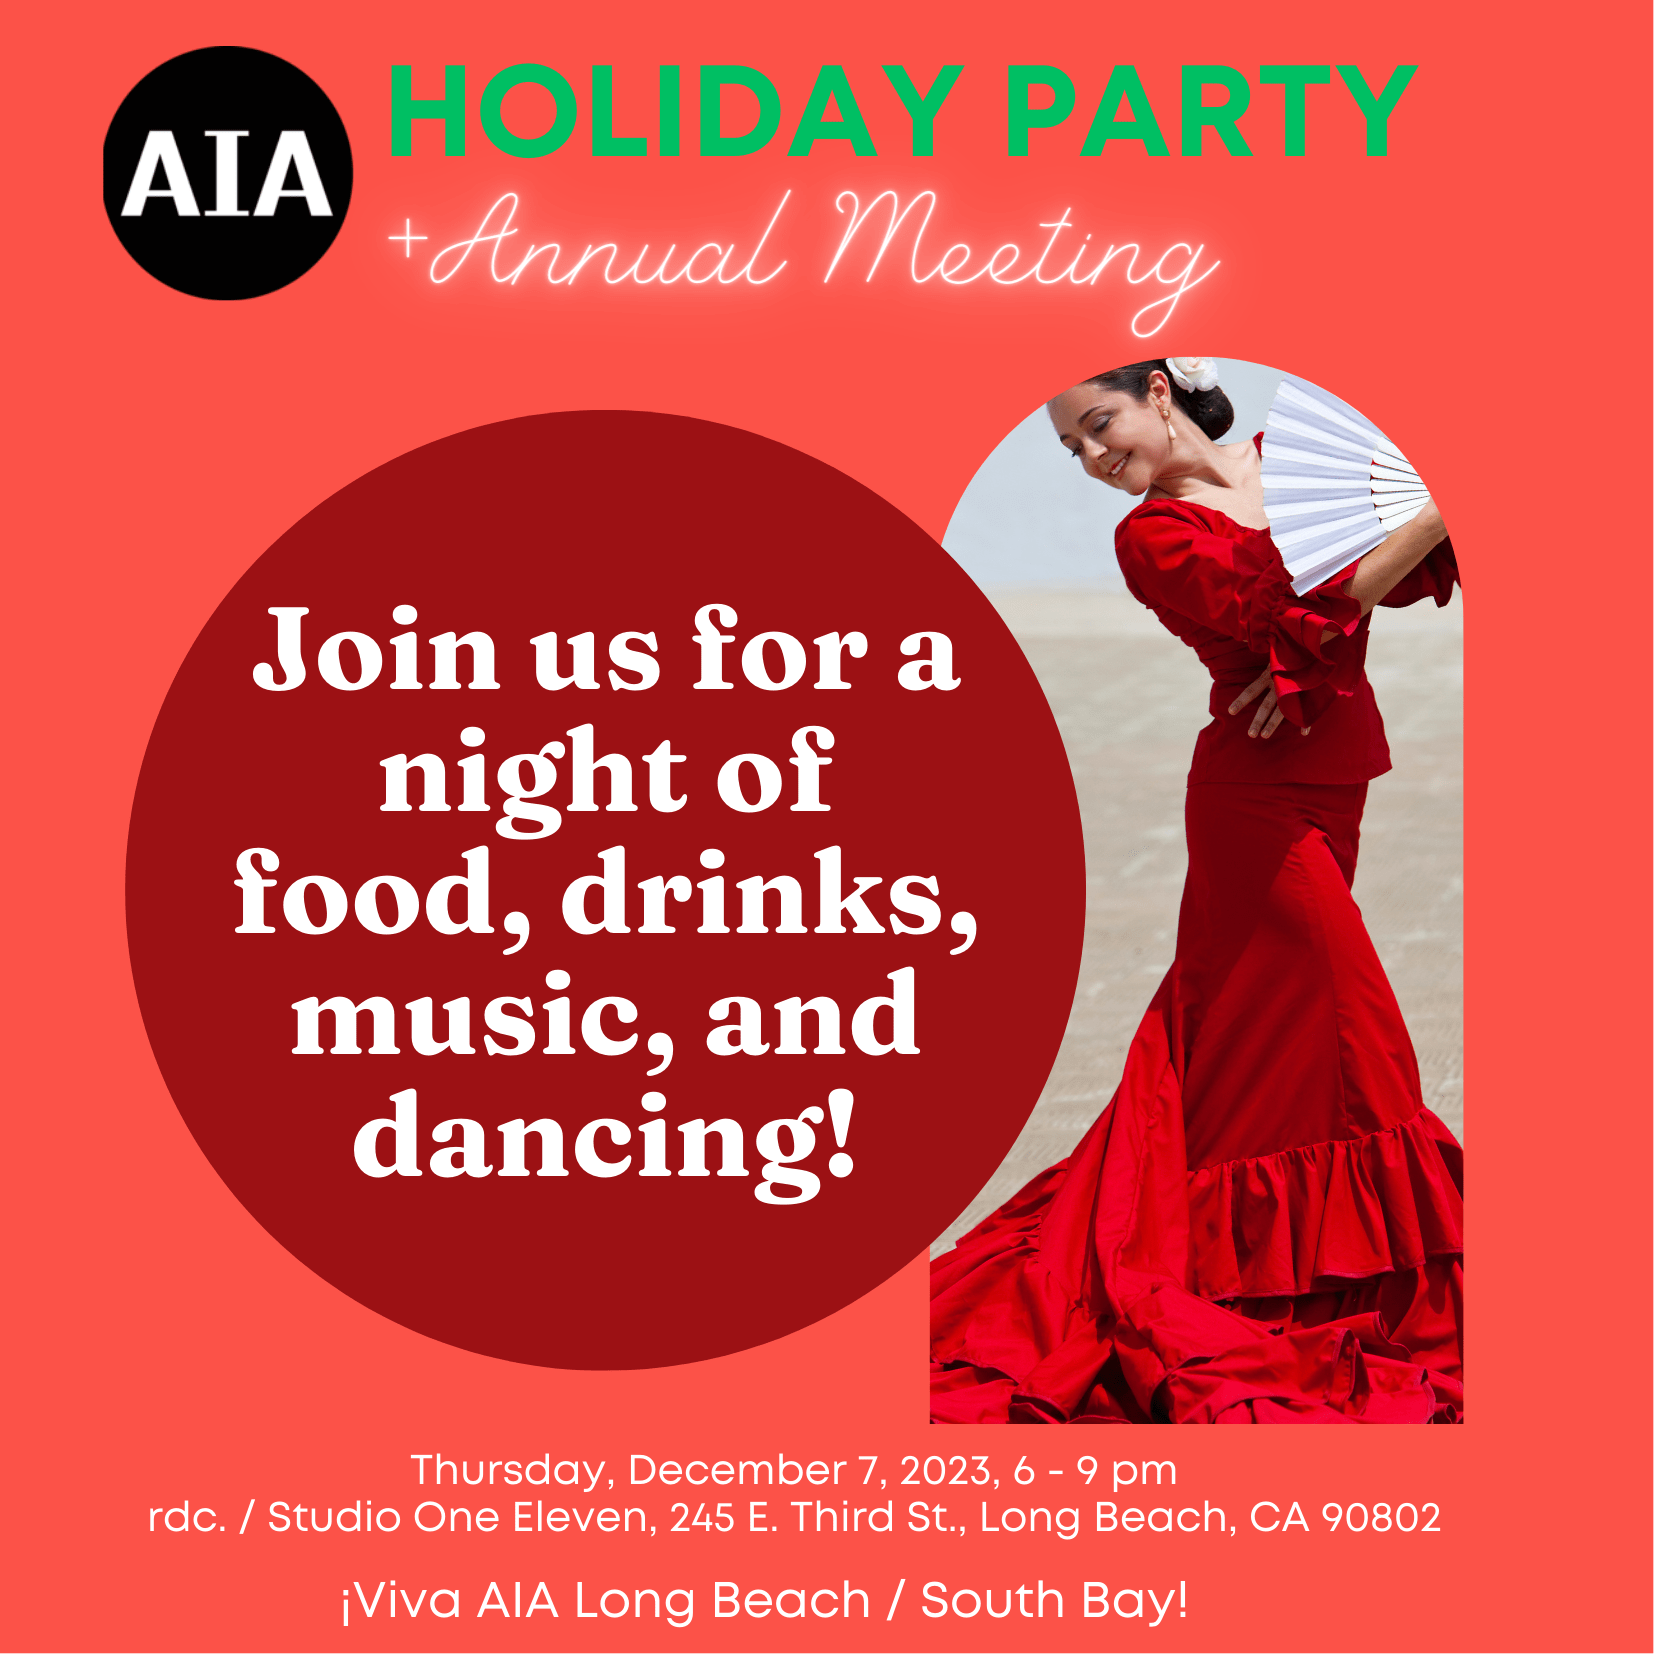 AIA LBSB Holiday Party and Annual Meeting 2023